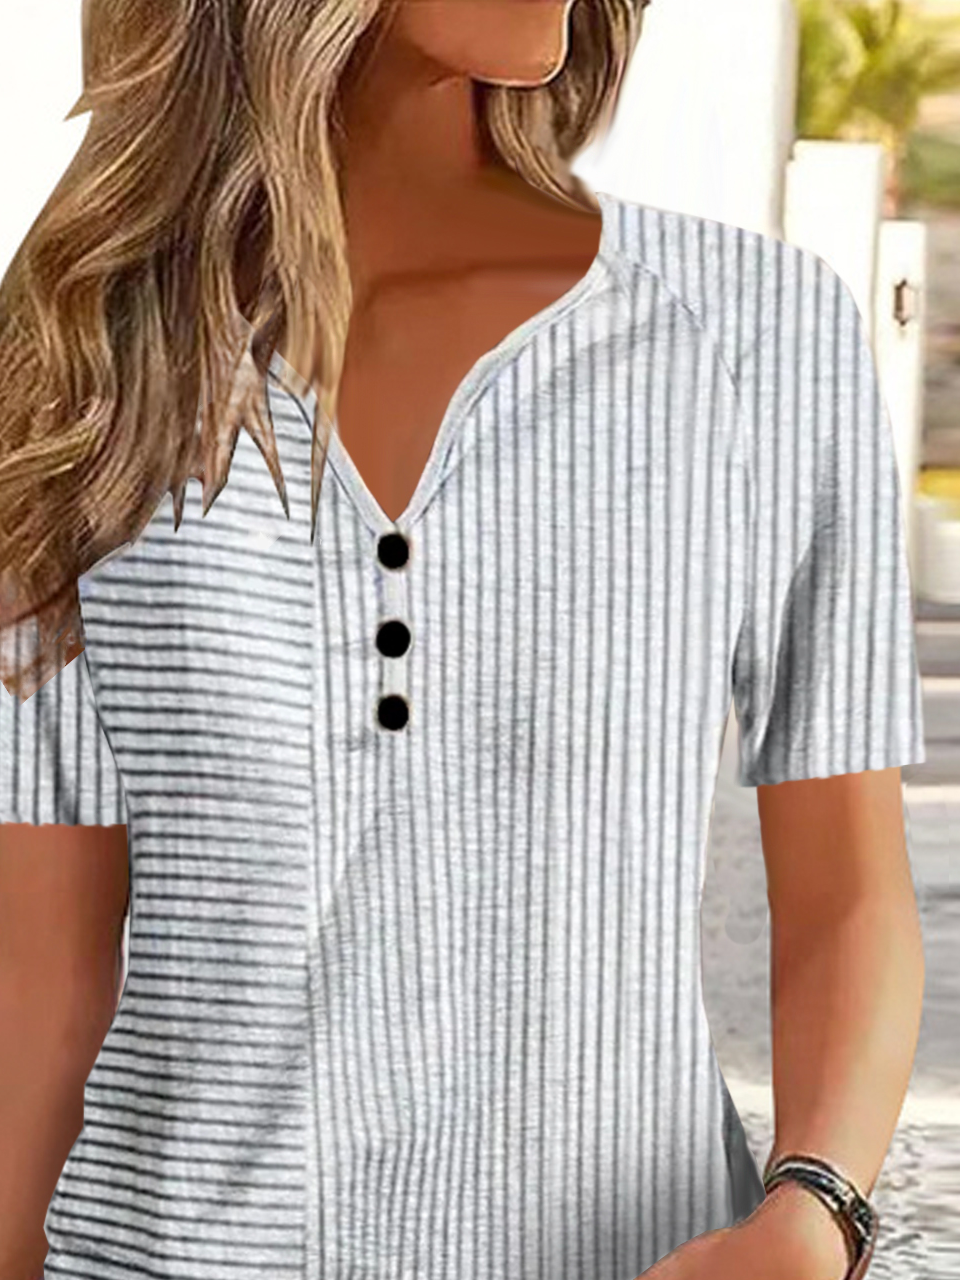 Women's Short Sleeve Blouse Summer Striped V Neck Daily Going Out Casual Top White